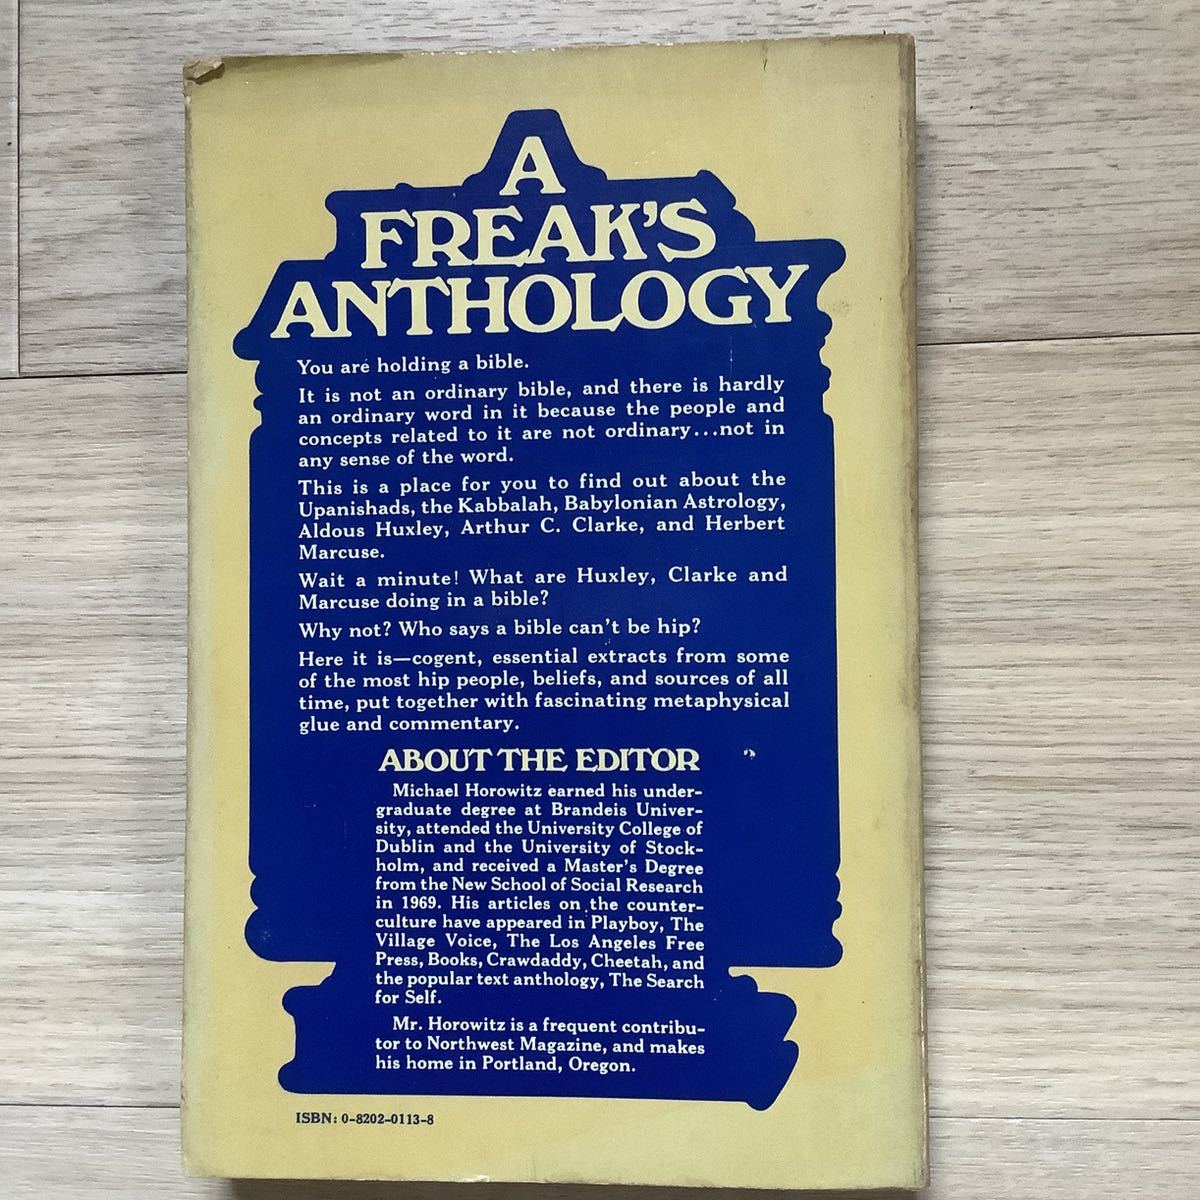 S【洋書】ヒッピー向けのガイド本？A FREAK’S ANTHOLOGY_画像3